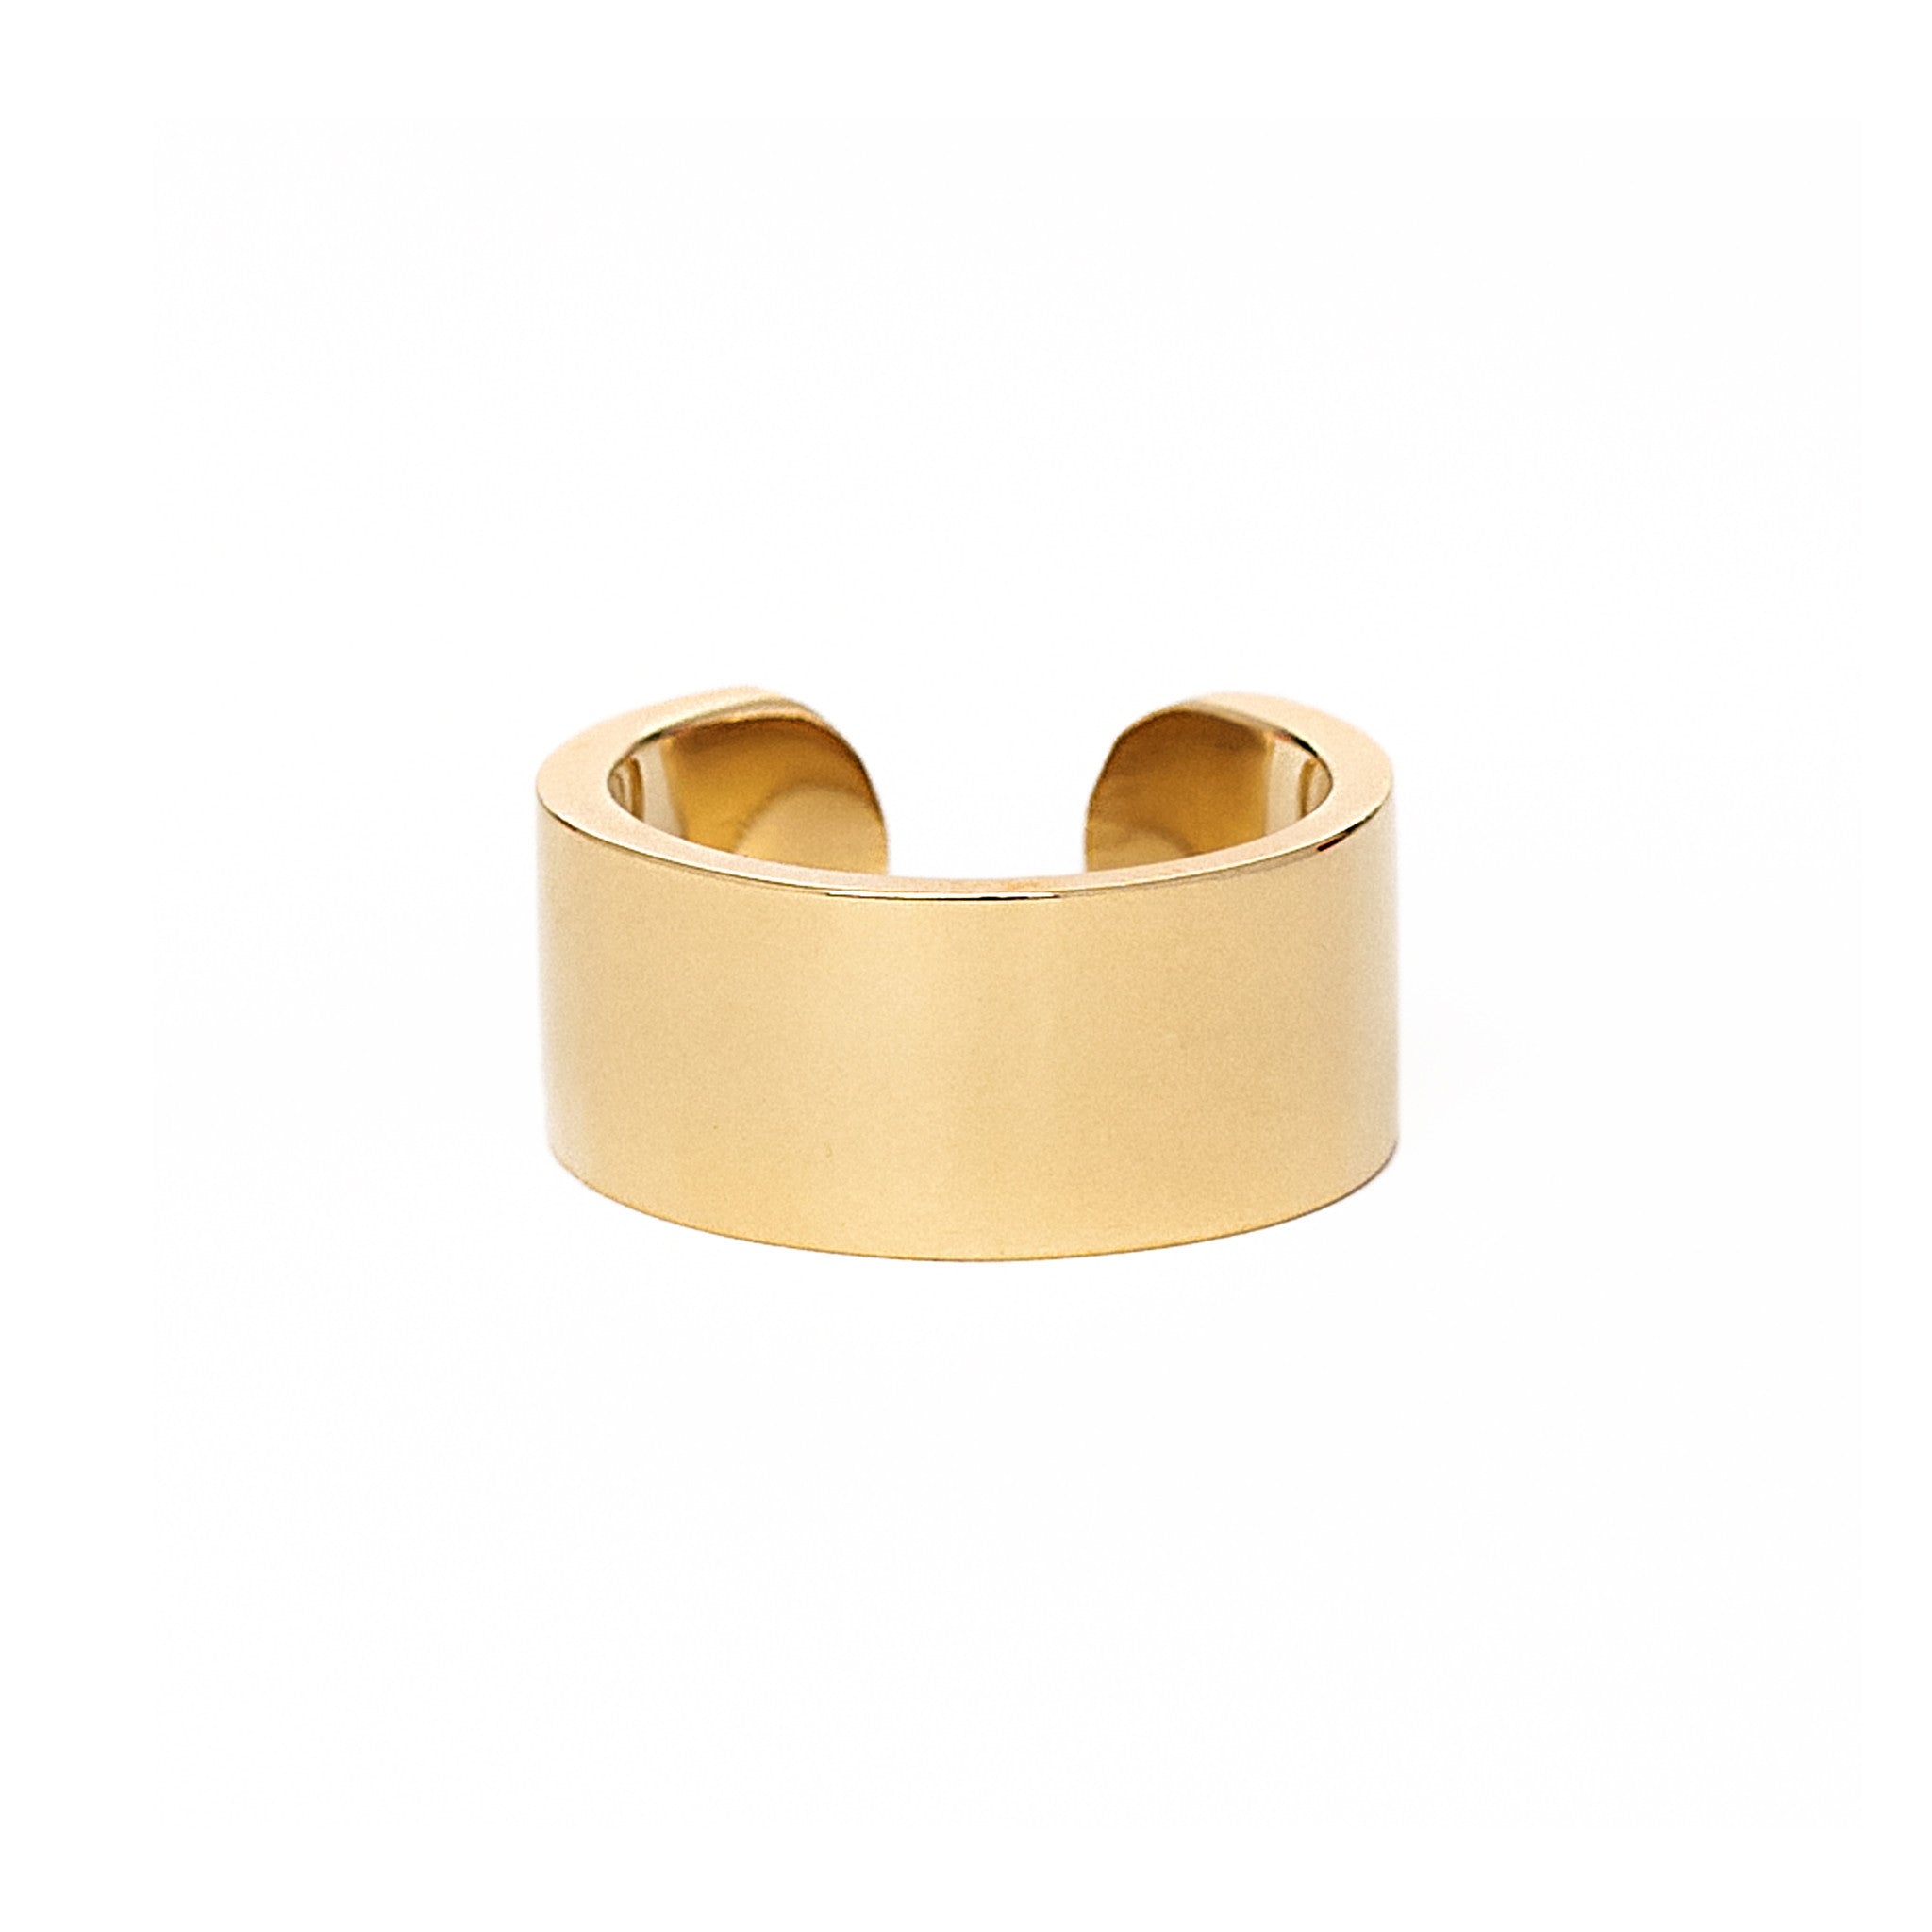 The Bitch Ring: Solid 14K Gold